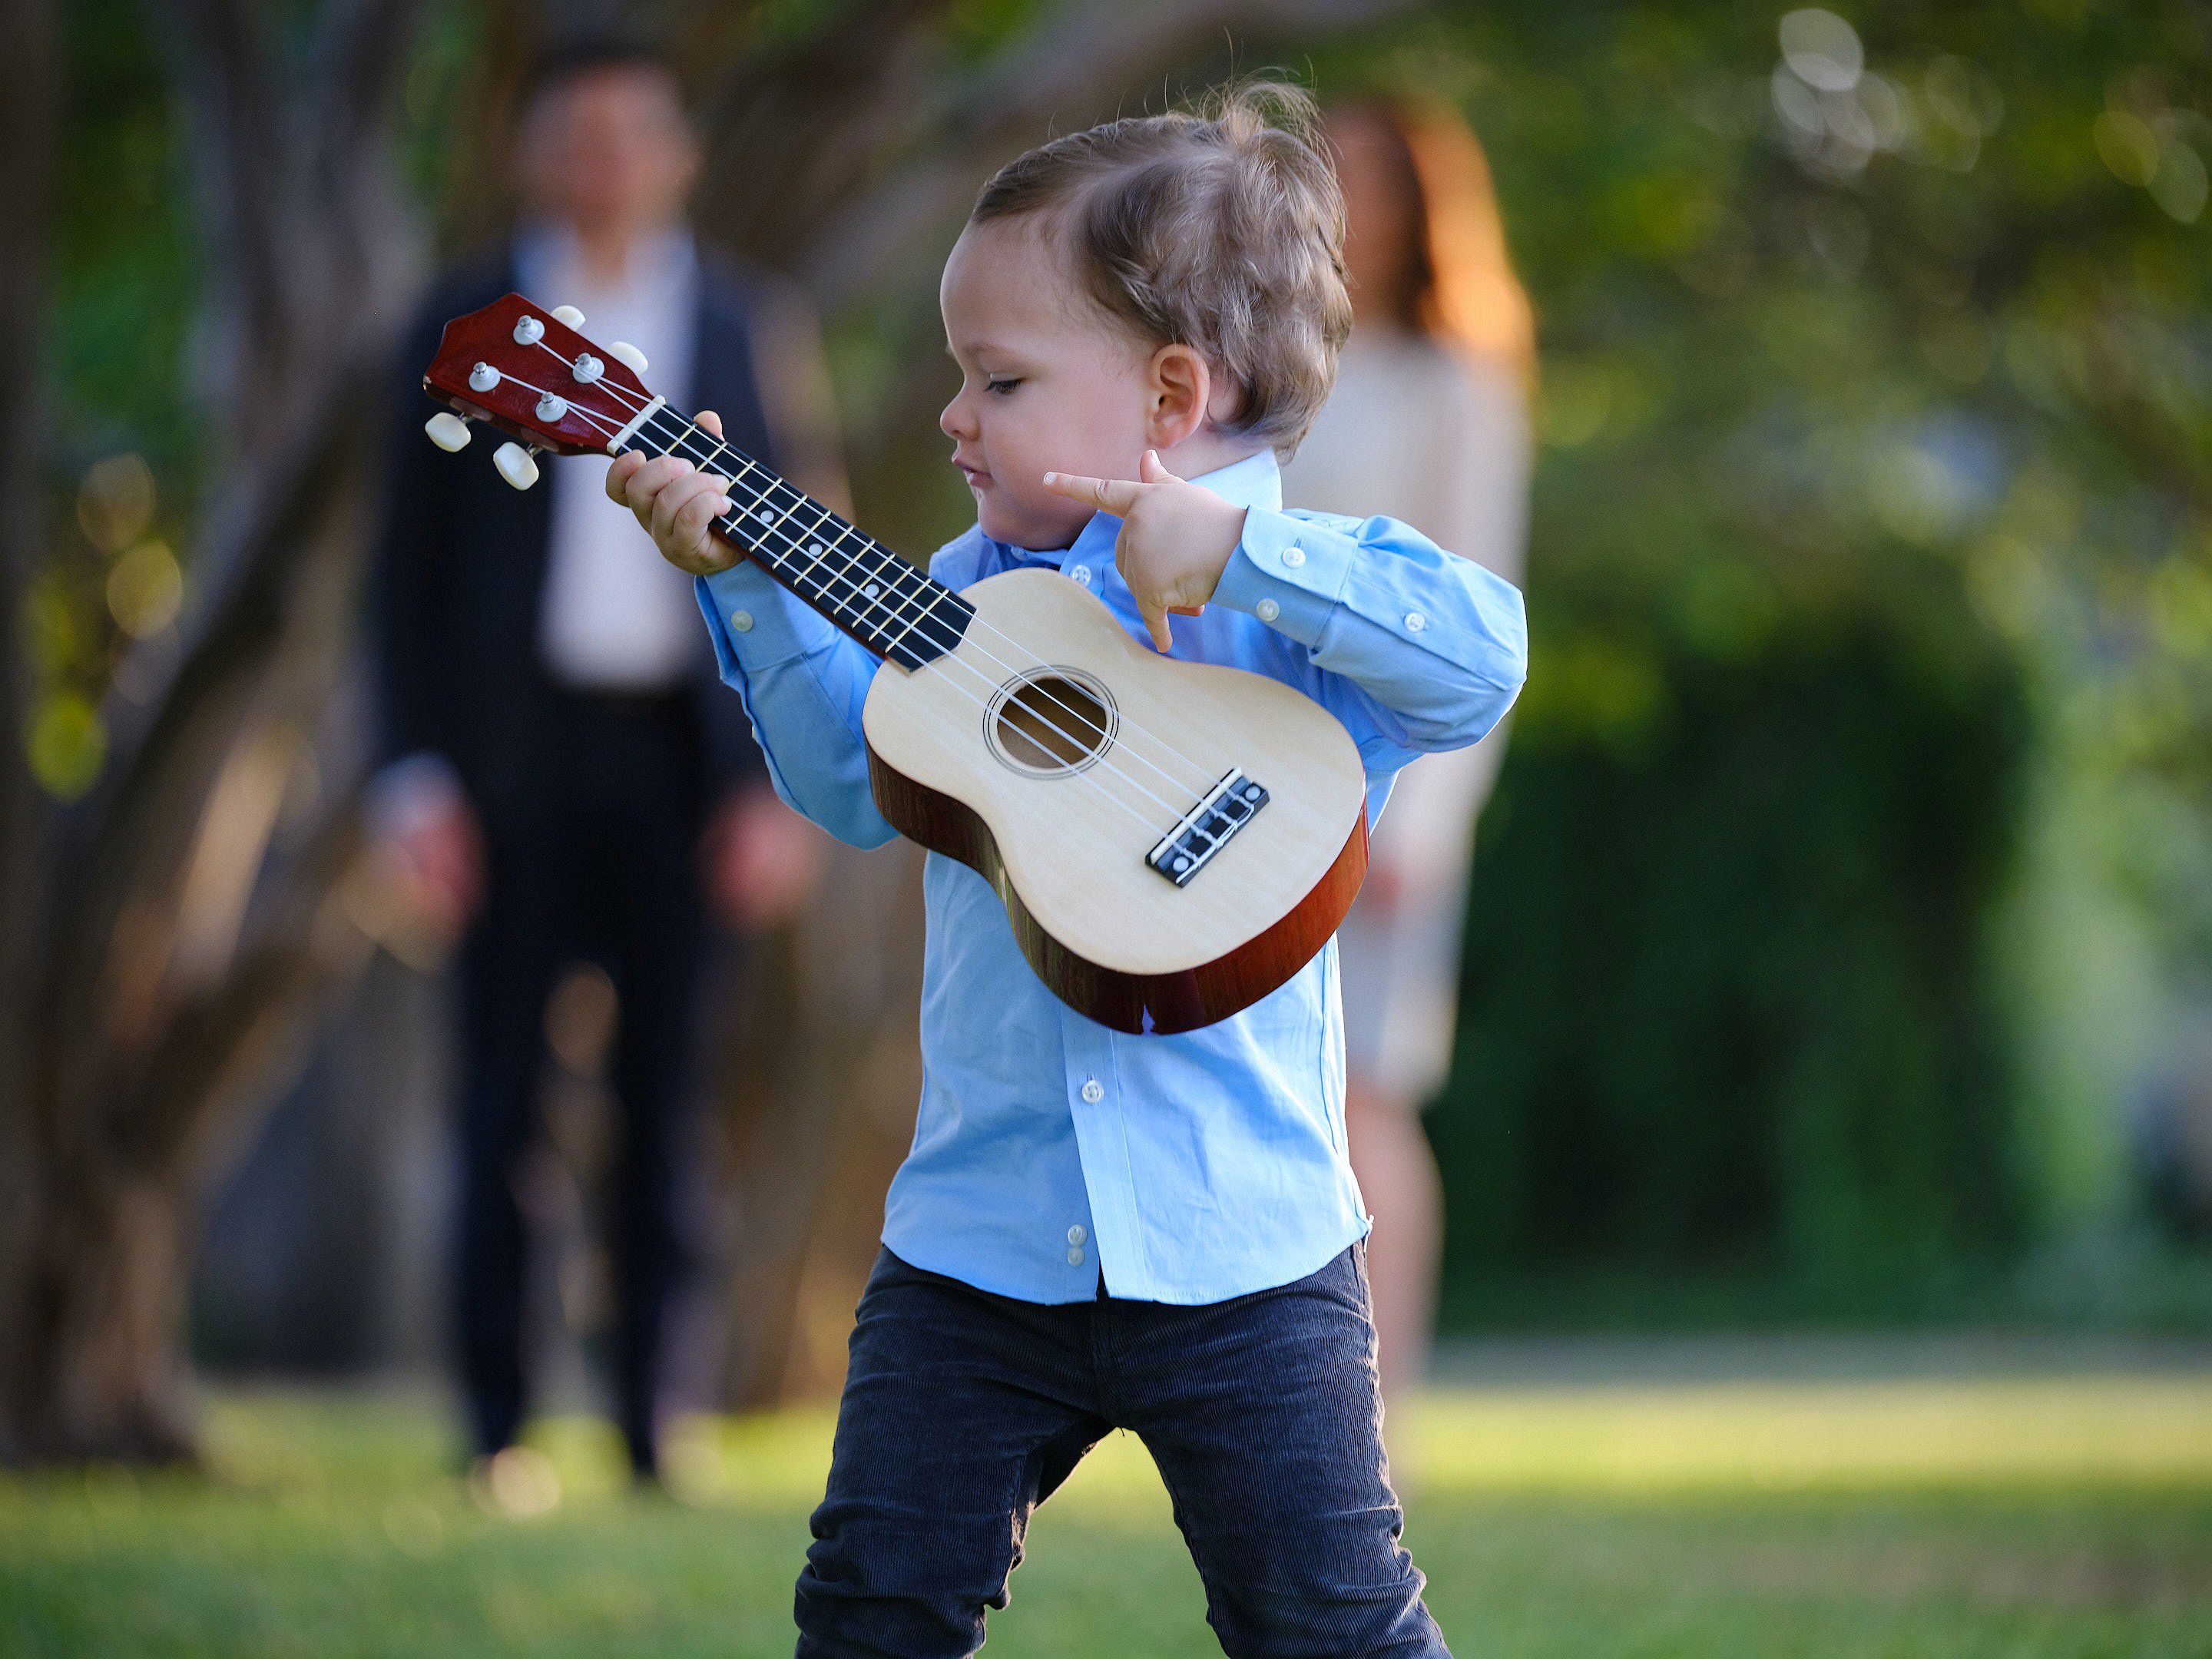 Color location portrait of a little boy playing a small guitar with his parents watching behind him